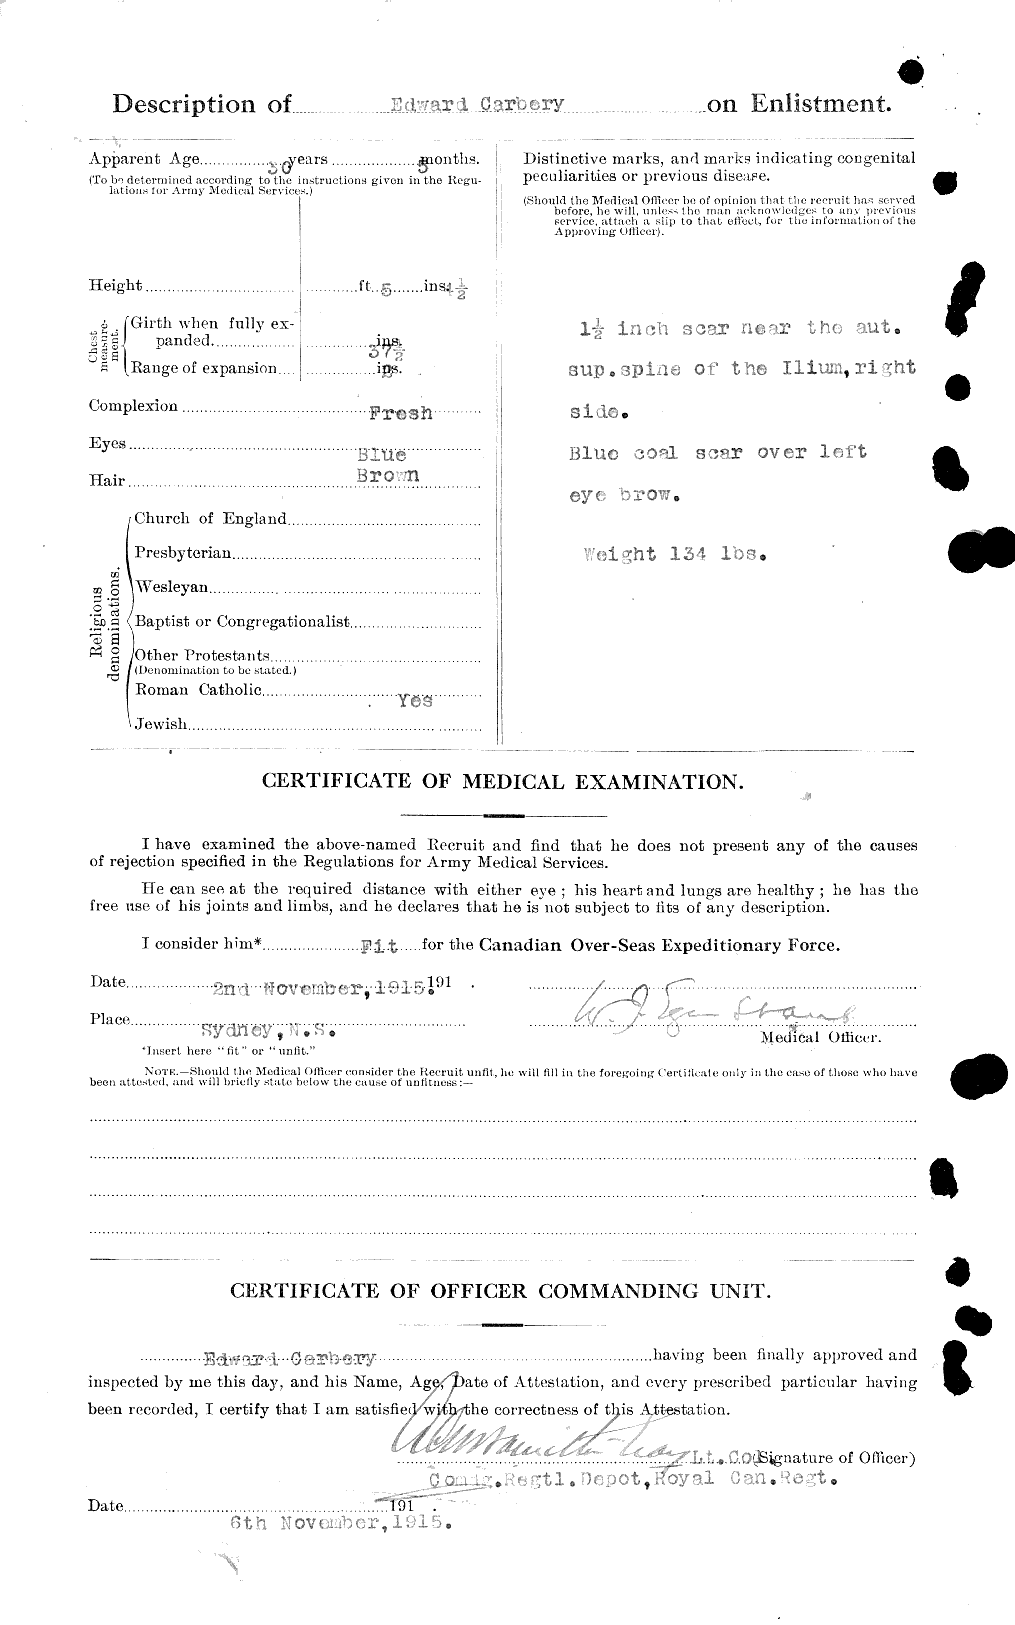 Personnel Records of the First World War - CEF 009208b